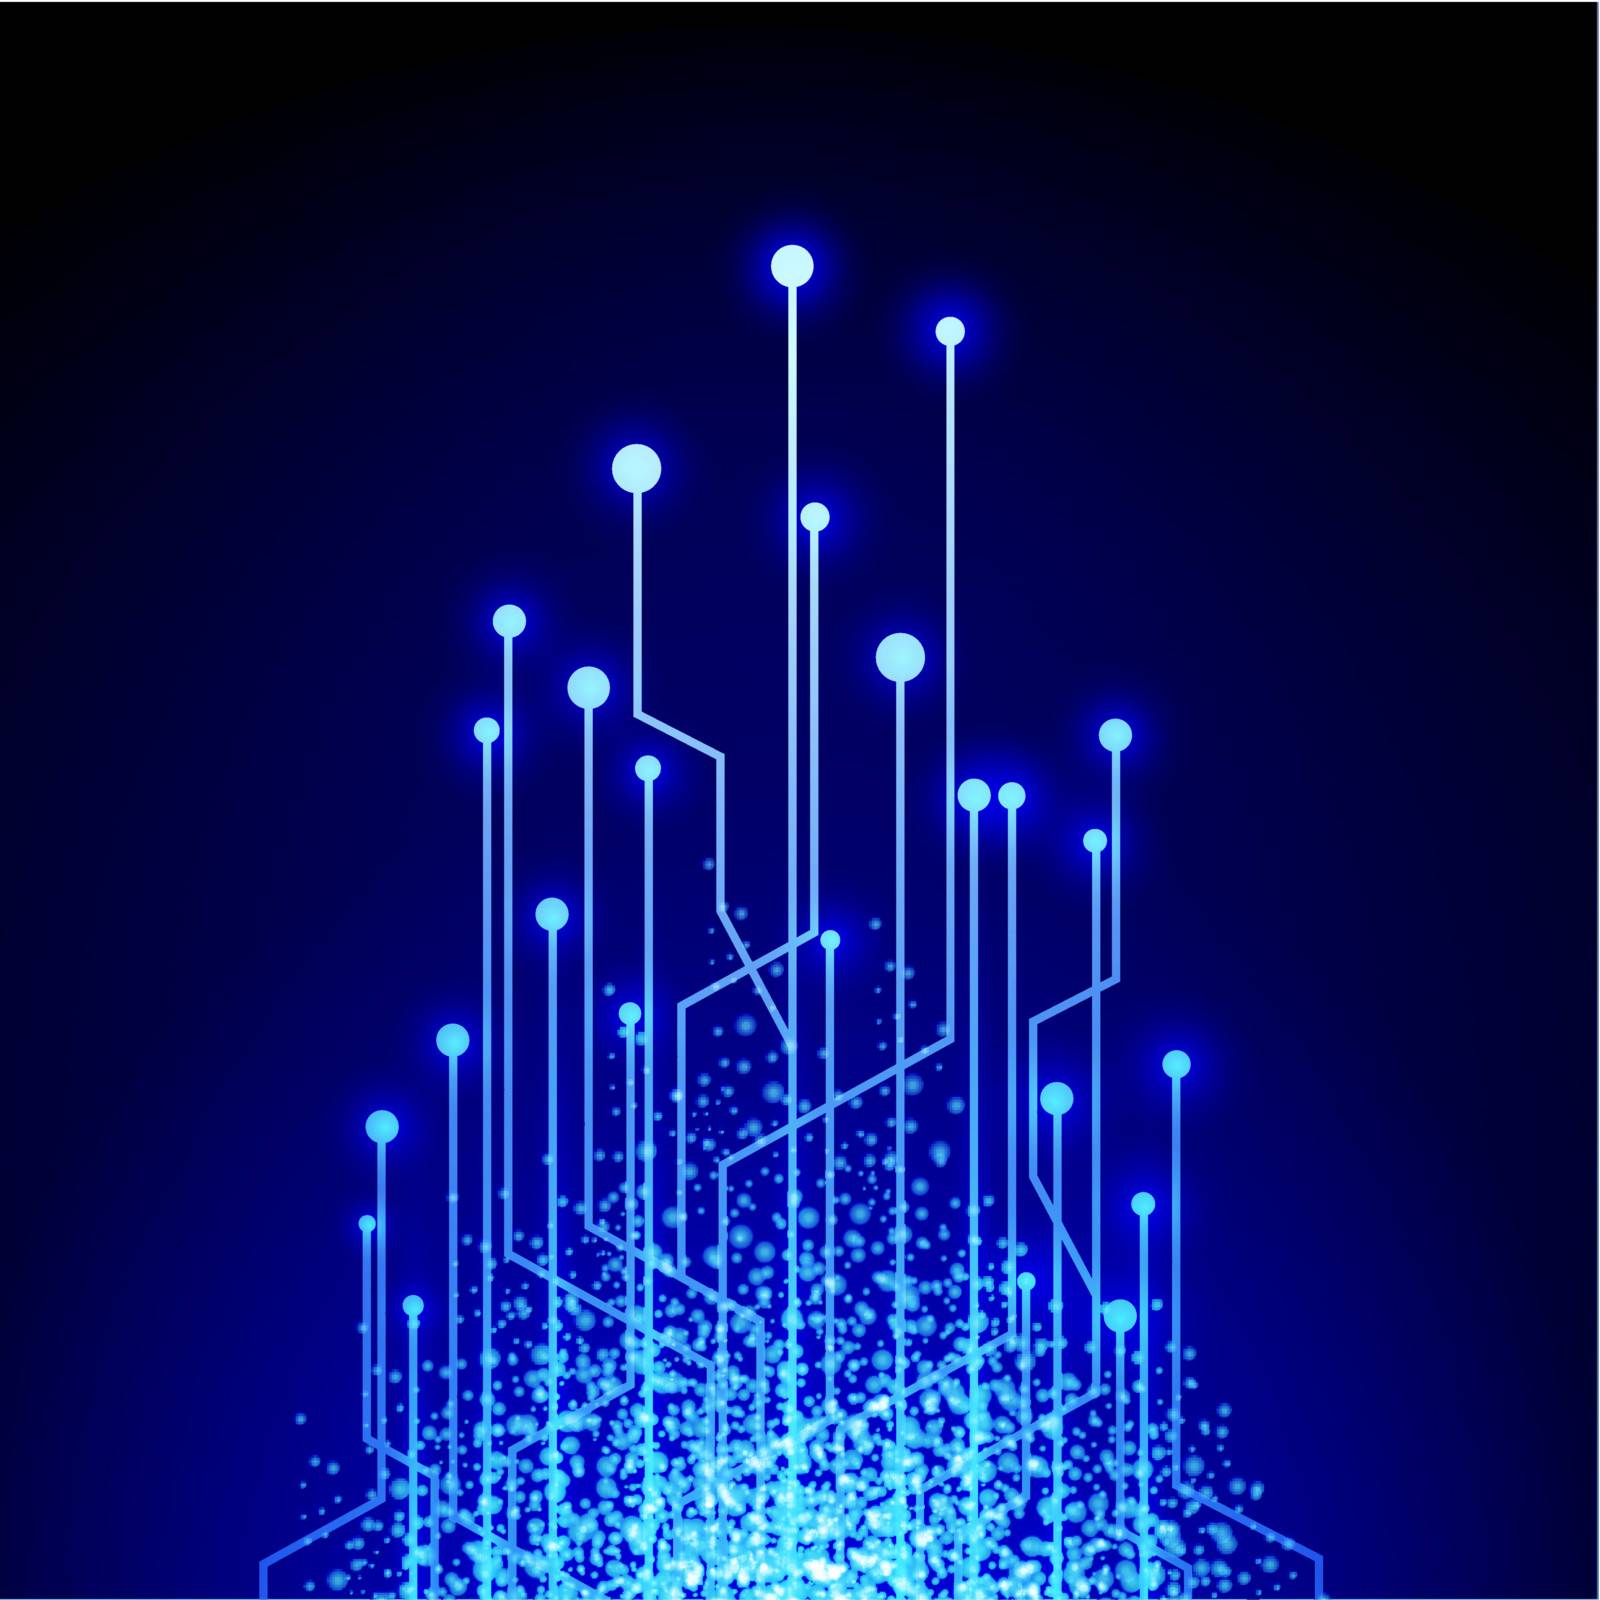 Illustration of Abstract Bright Electronic Circuit in Blue